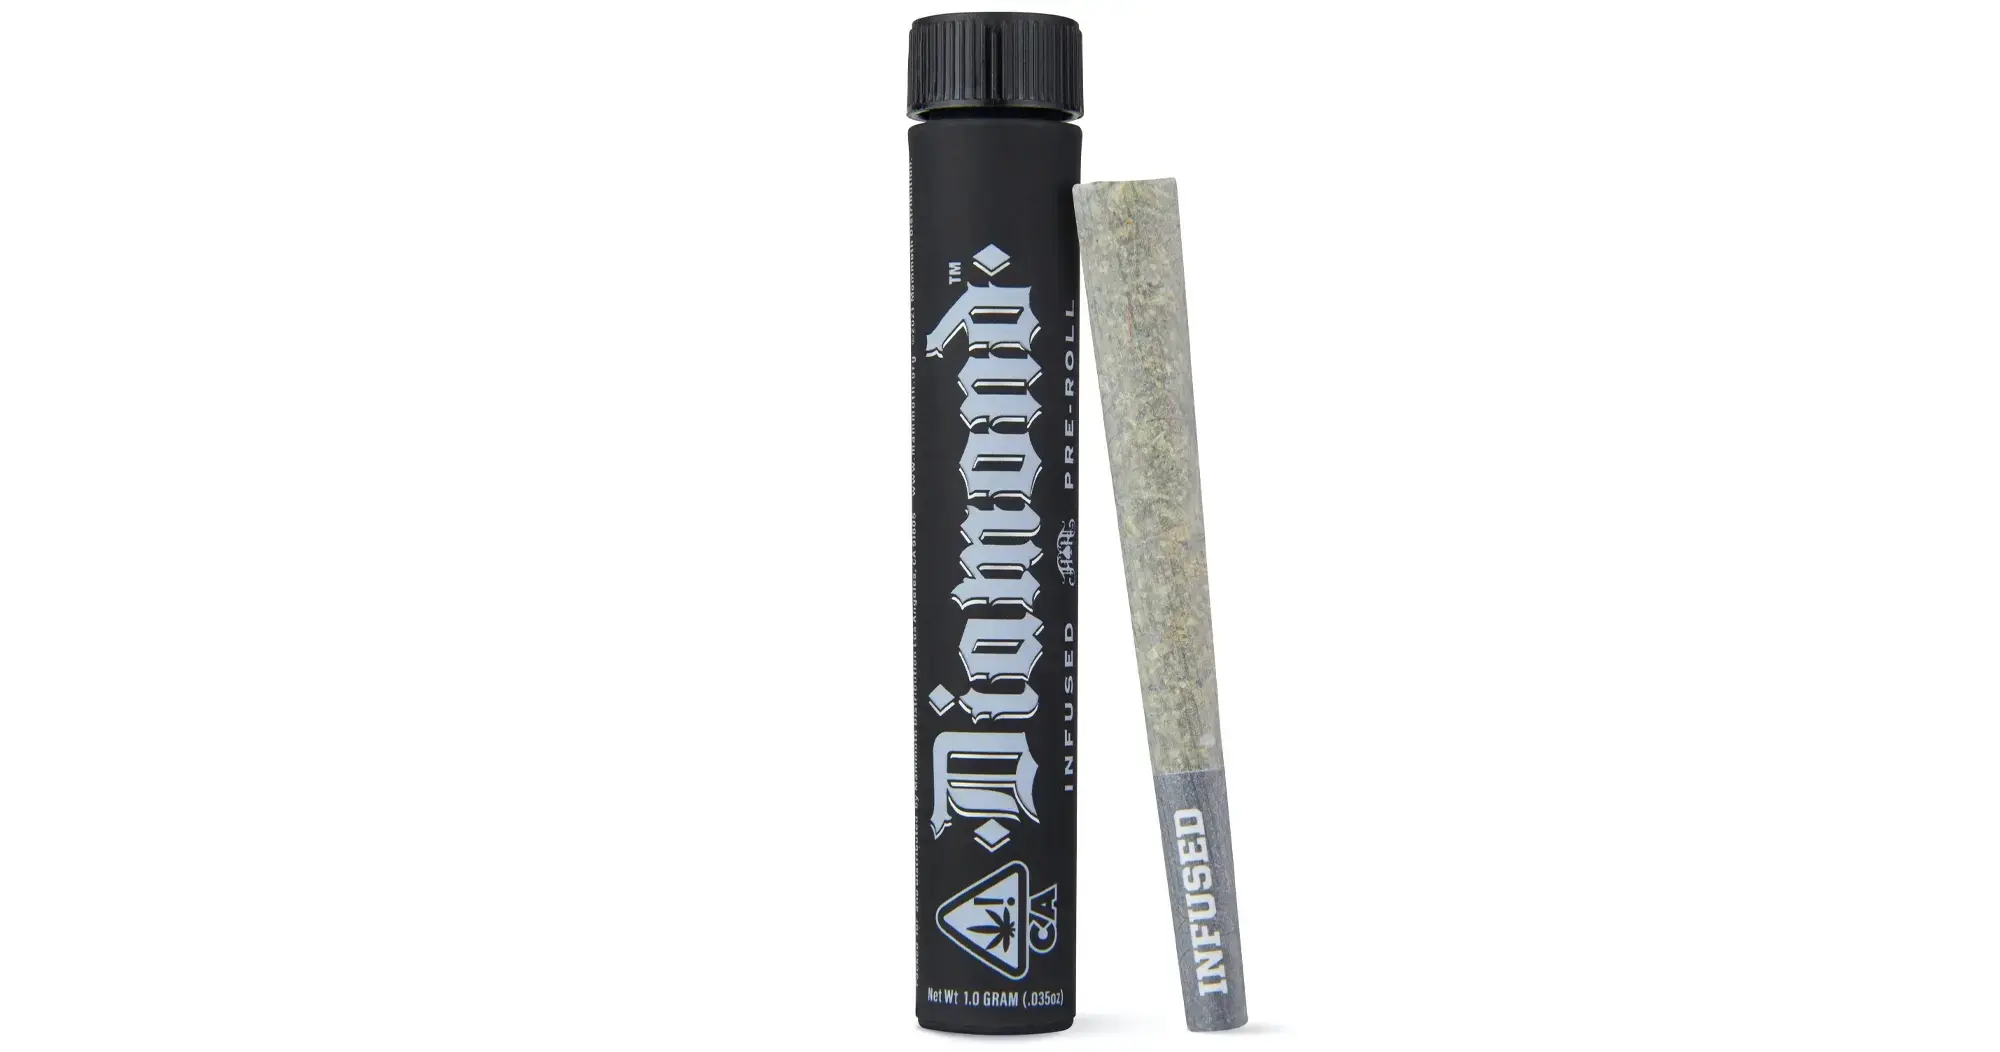 First Class Funk Diamond Infused Pre-Roll